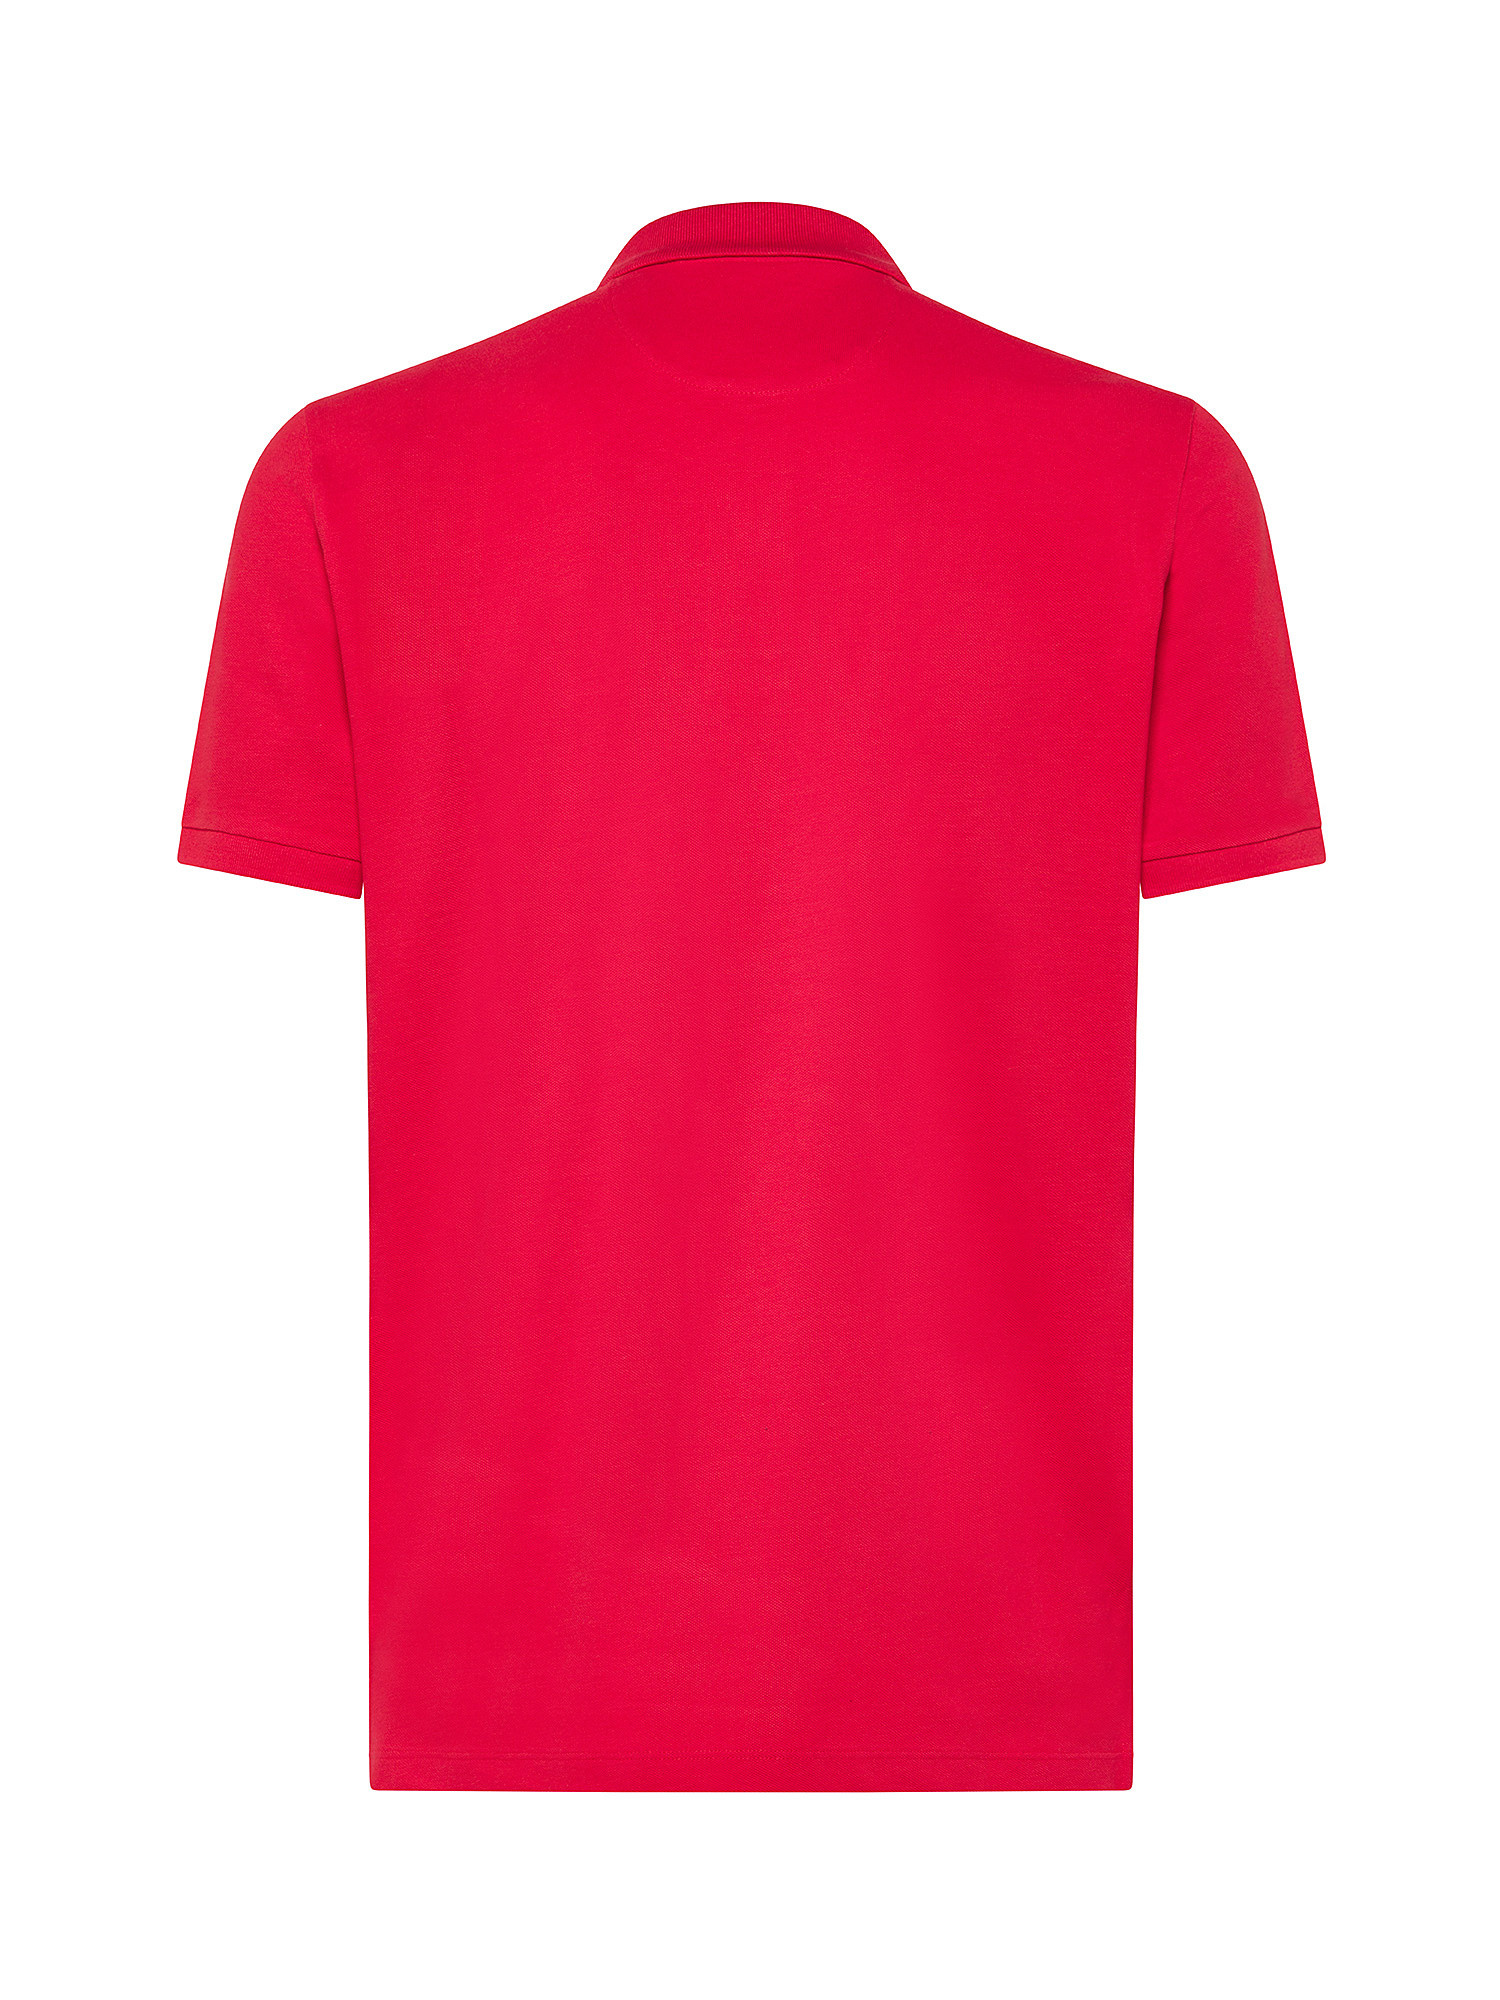 Luca D'Altieri - Polo in pure cotton, Red, large image number 1